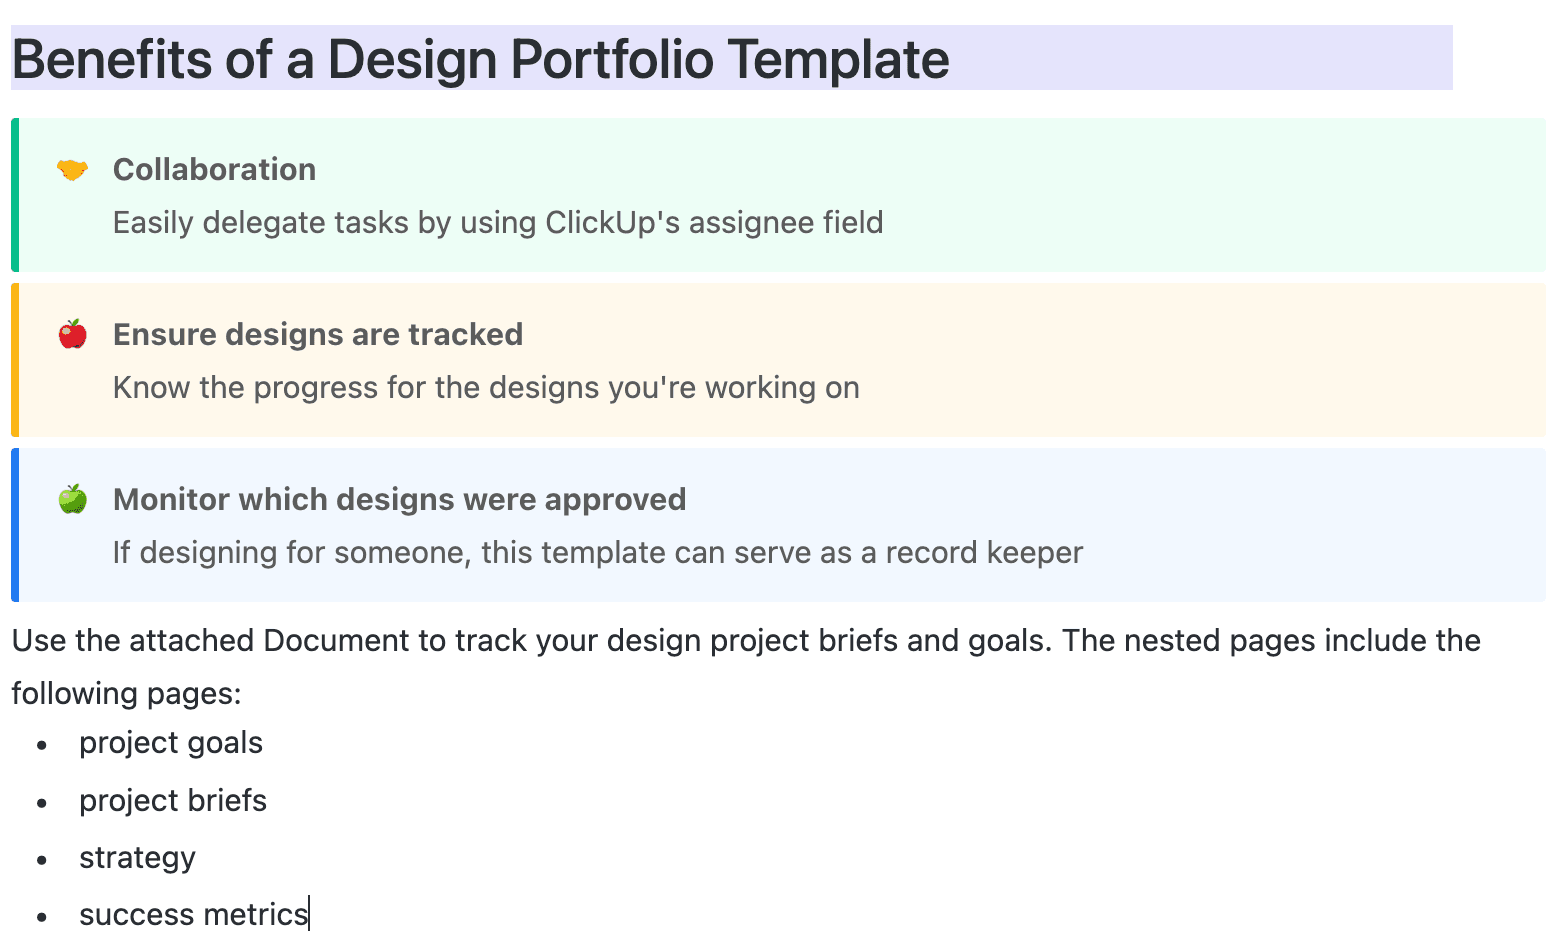 Use this design portfolio template to ease workflows, check and balance projects, track tasks and deadlines, inspire collaboration, and share your work easily.